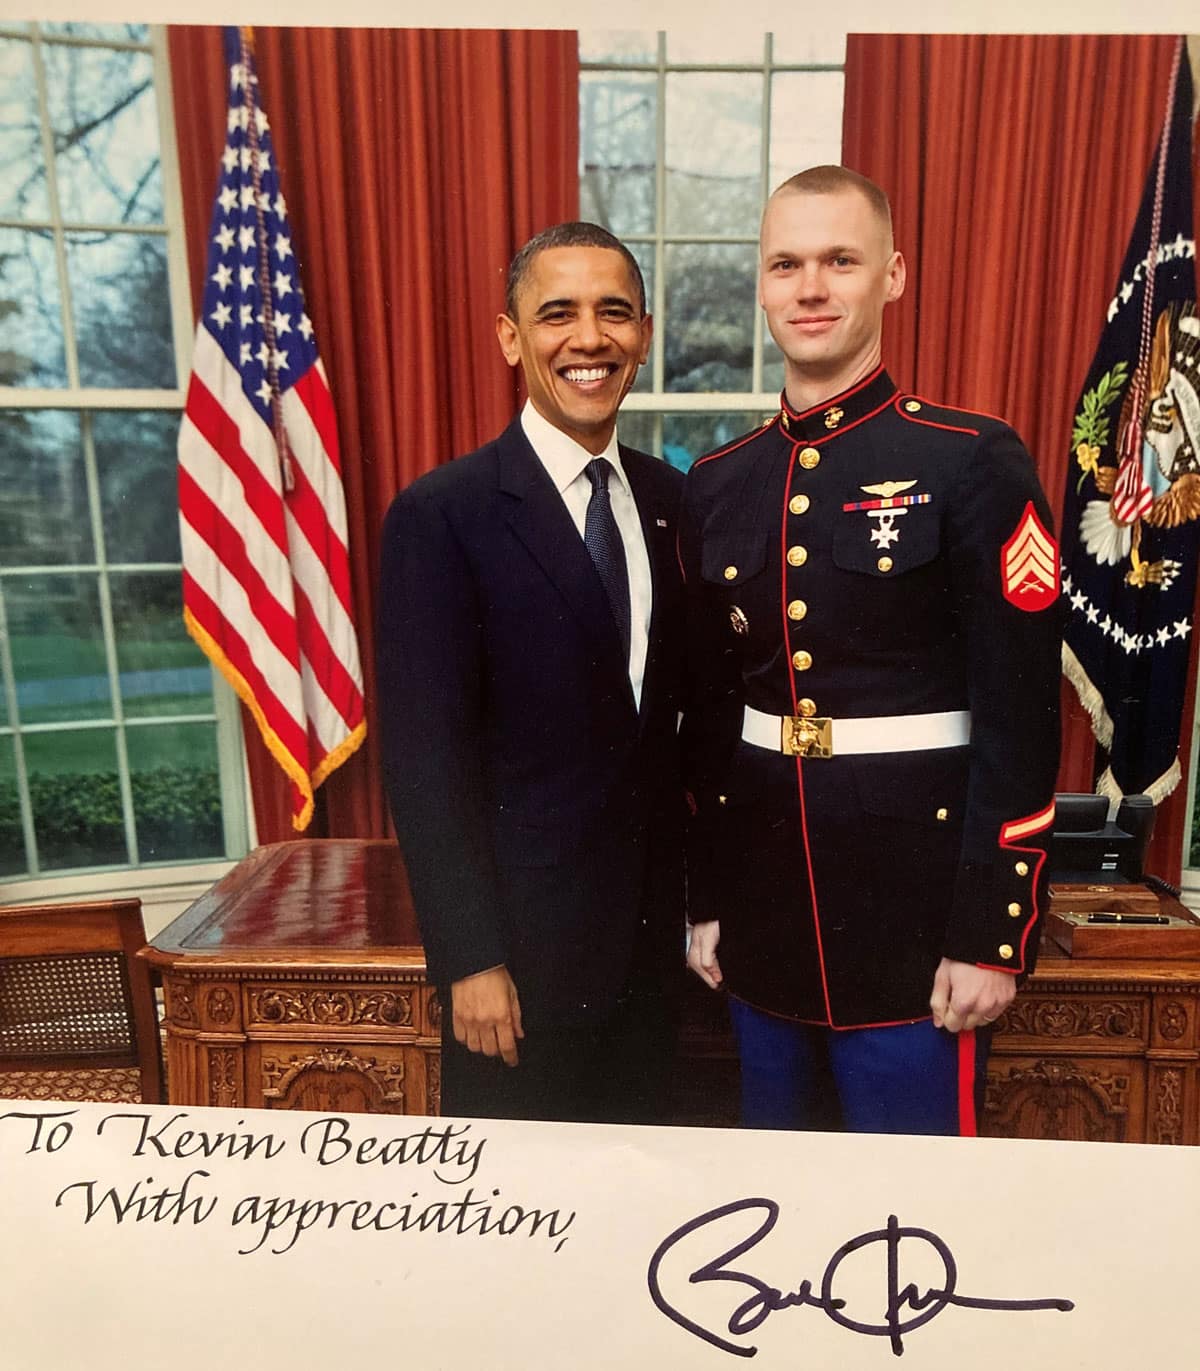 Soldier stands with Barack Obama